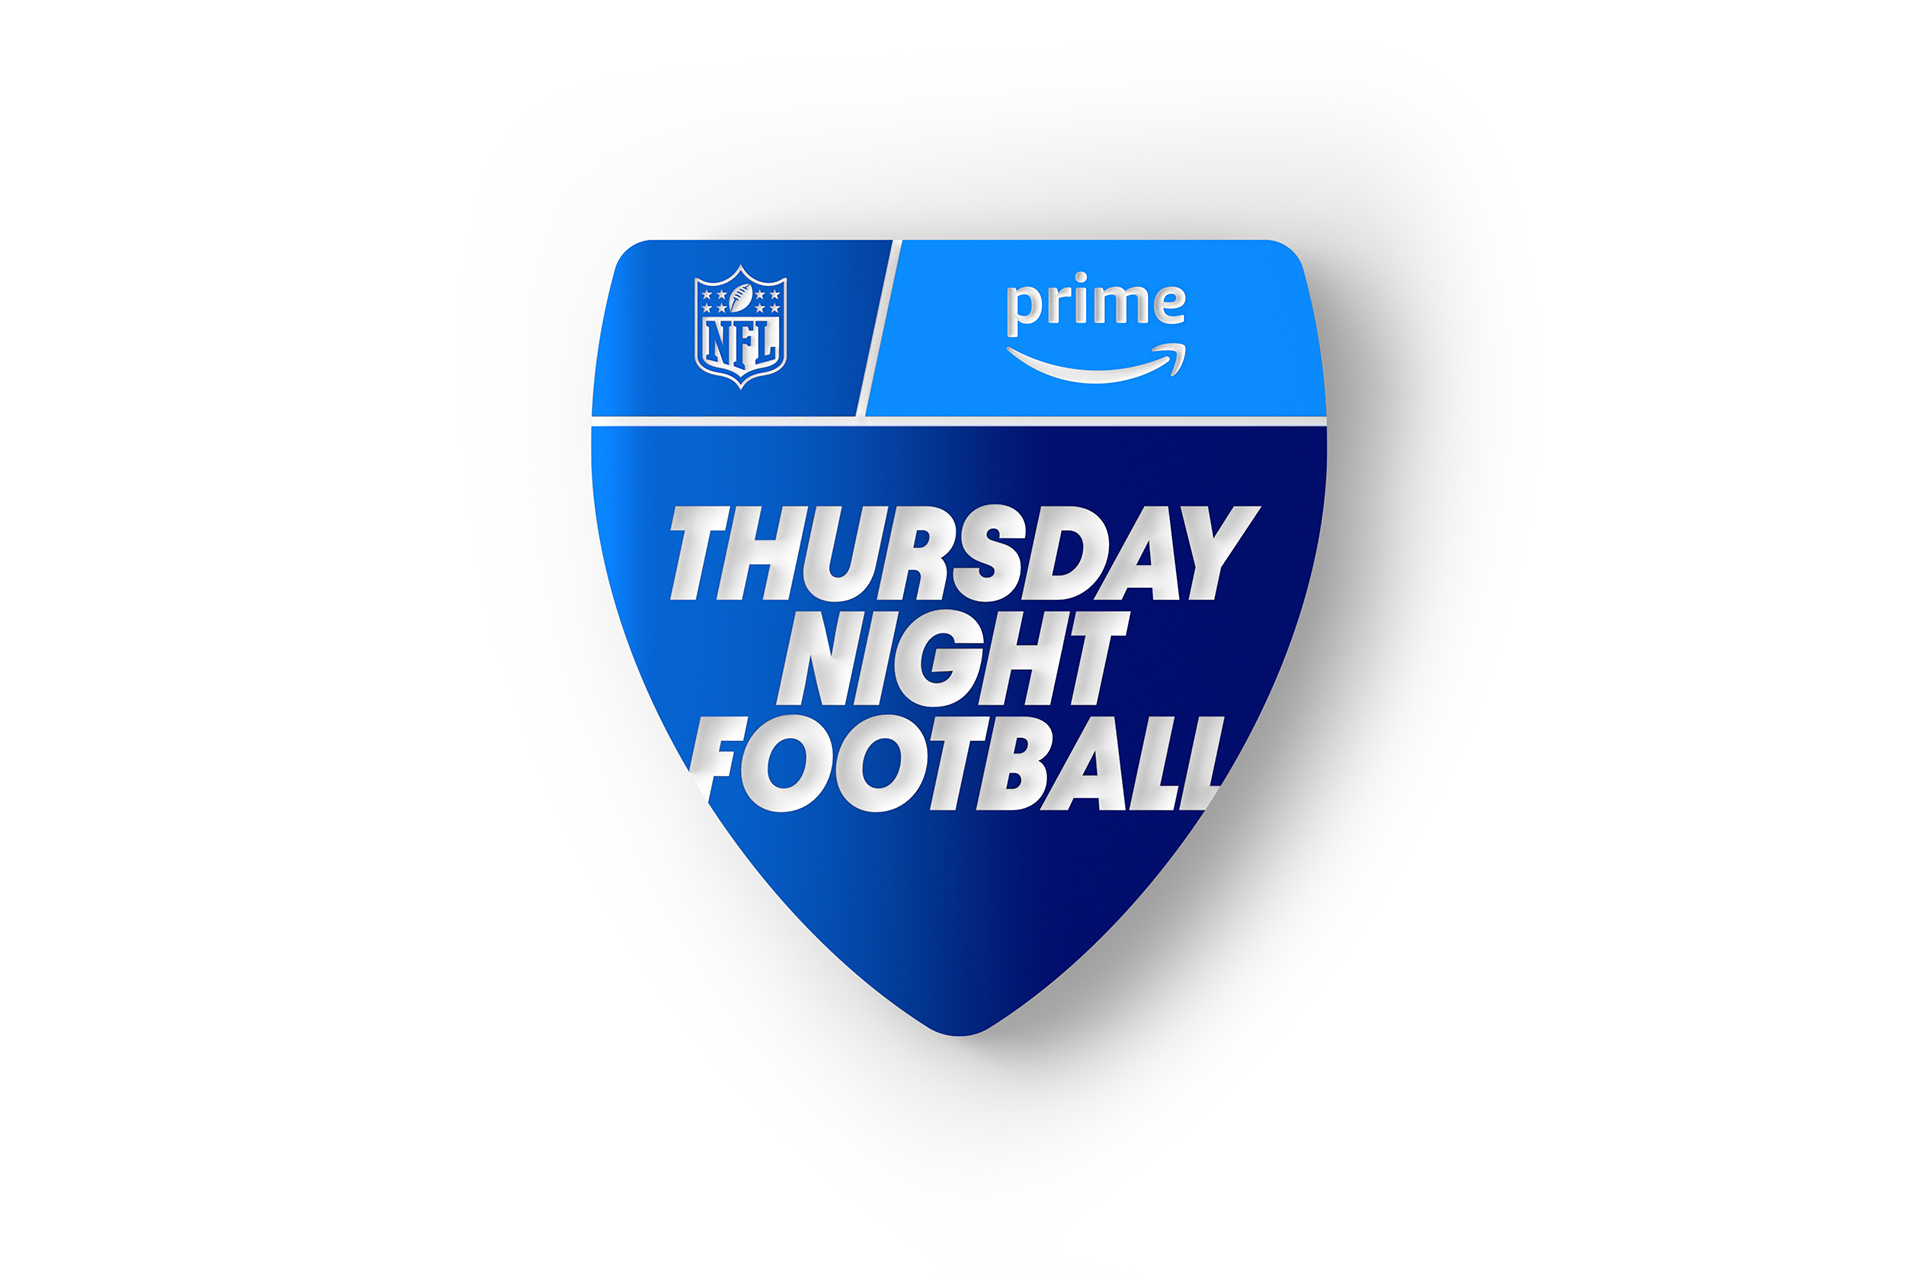 Amazon Rolling Out Thursday Night Football Promos, New Fresh Stores HomePage News